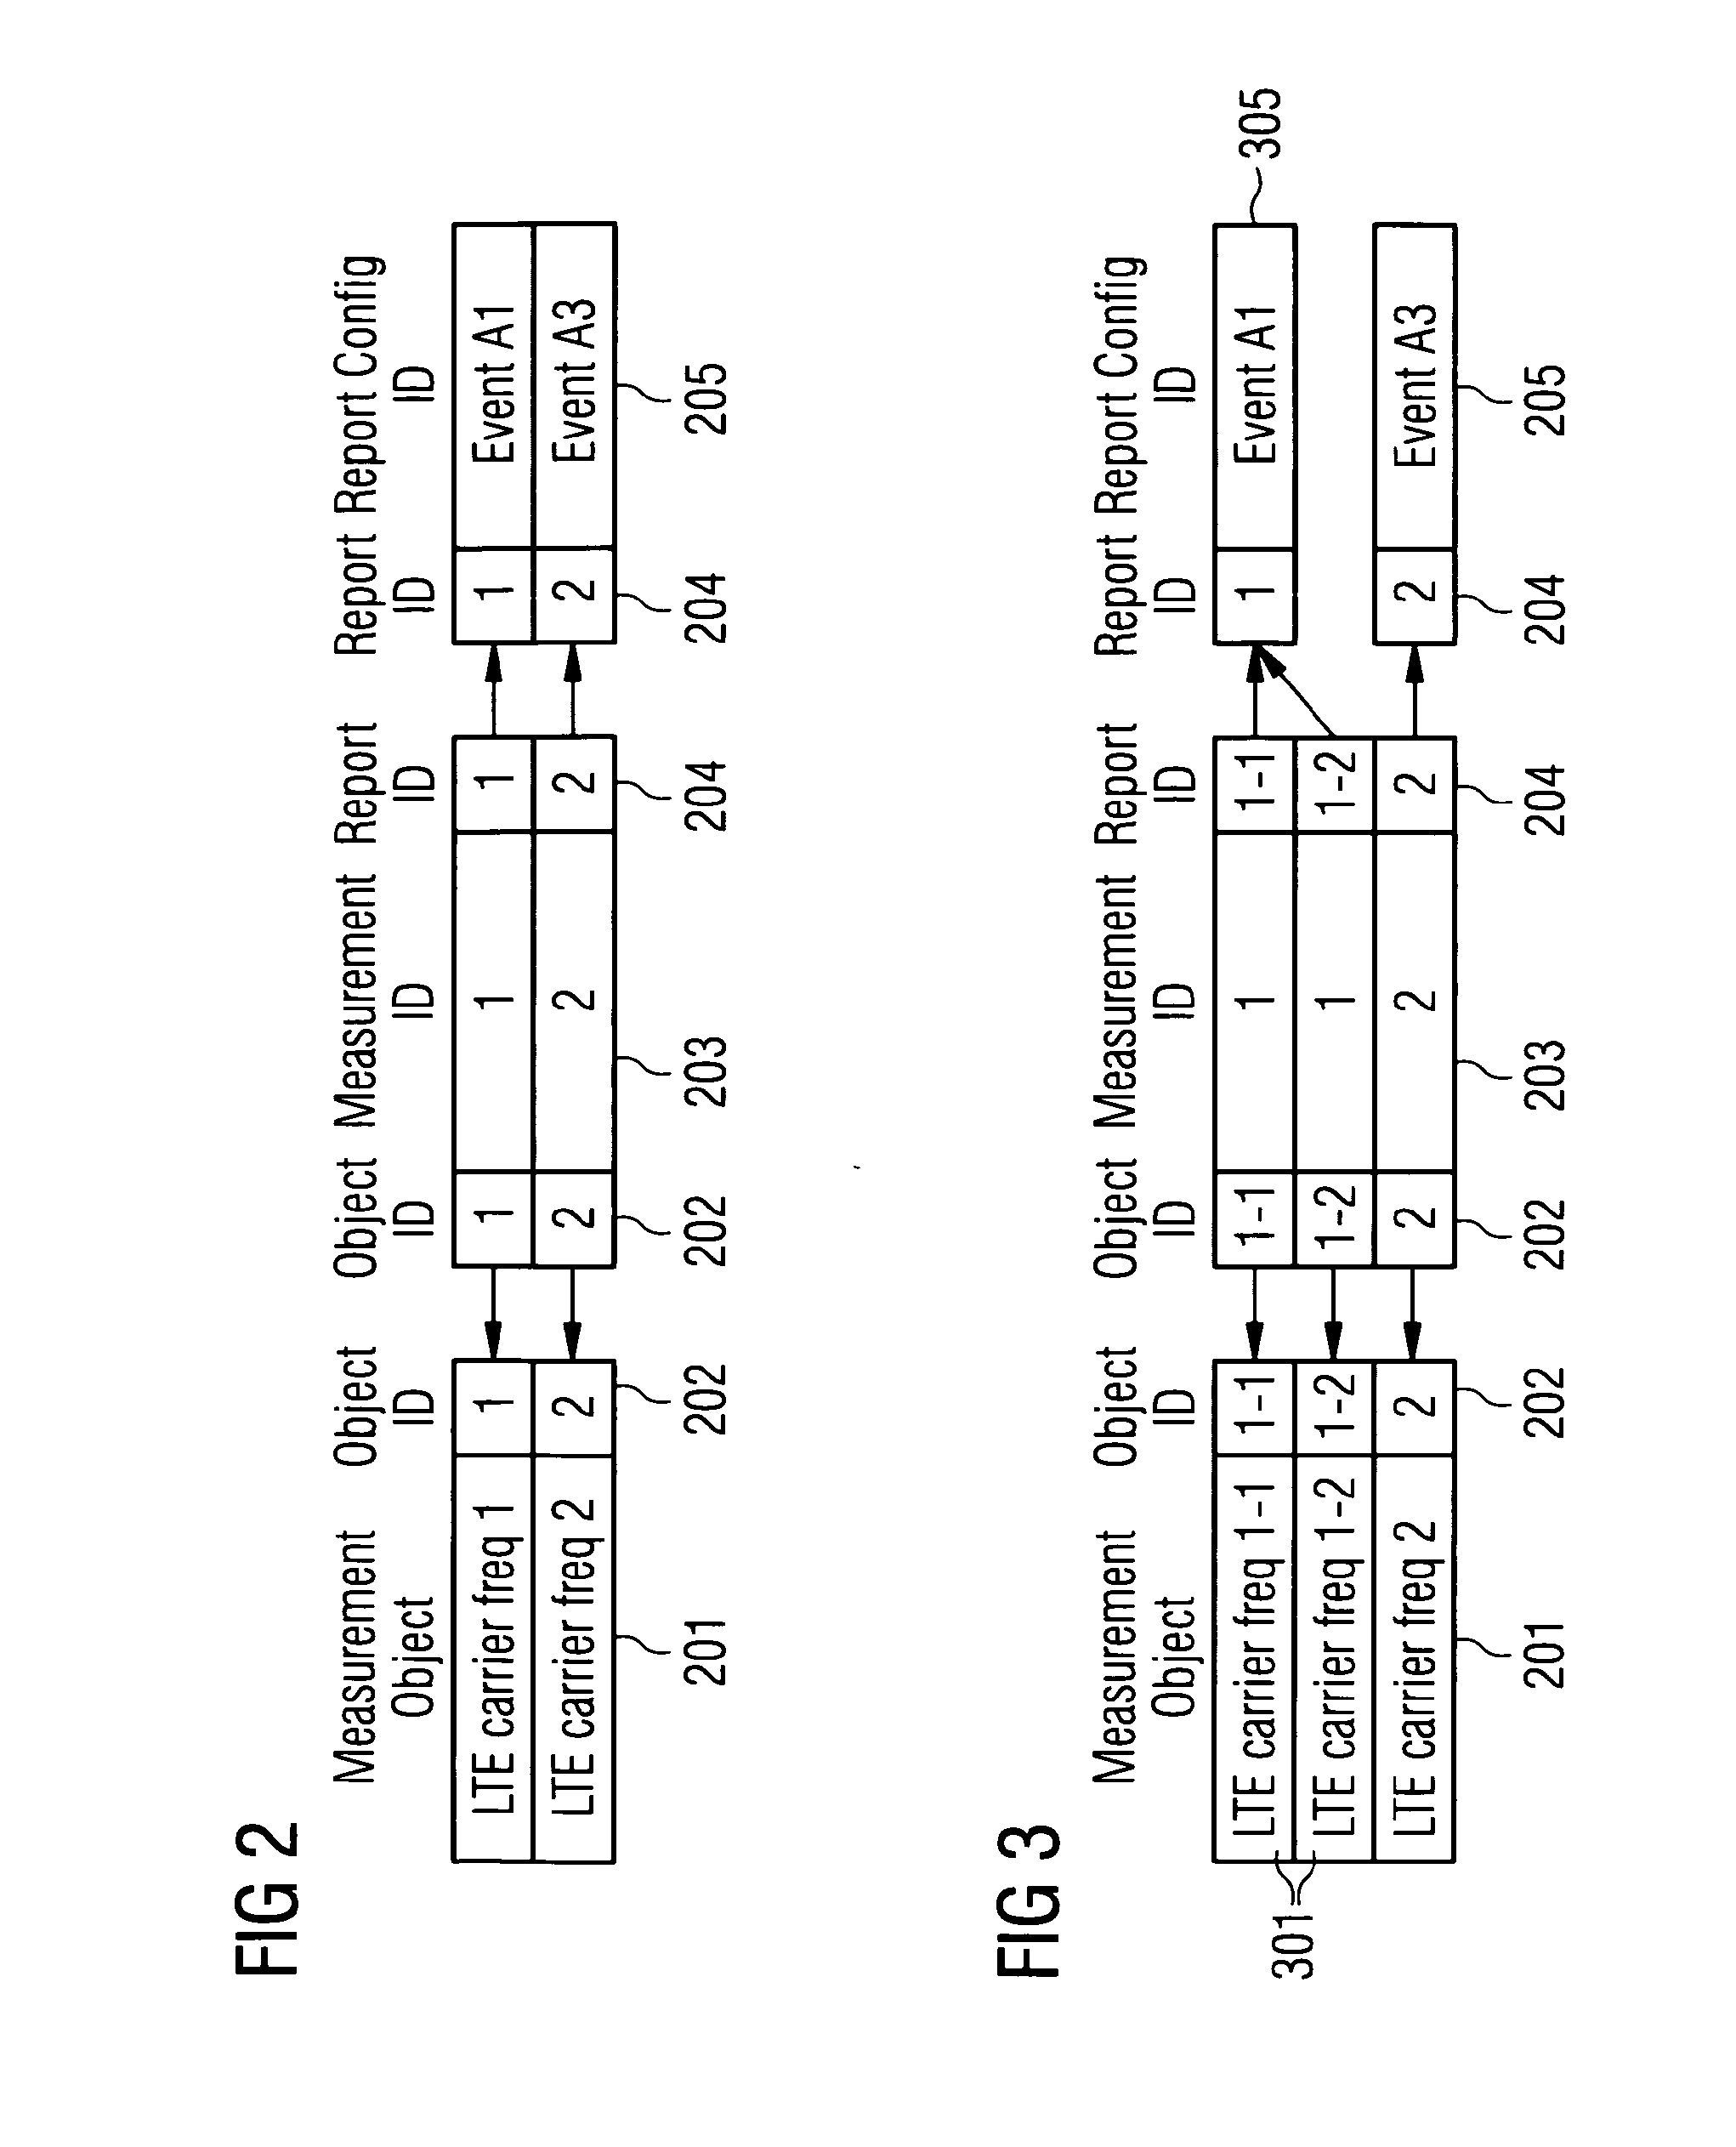 Controlling Radio Measurements of a User Equipment within a Cellular Network System